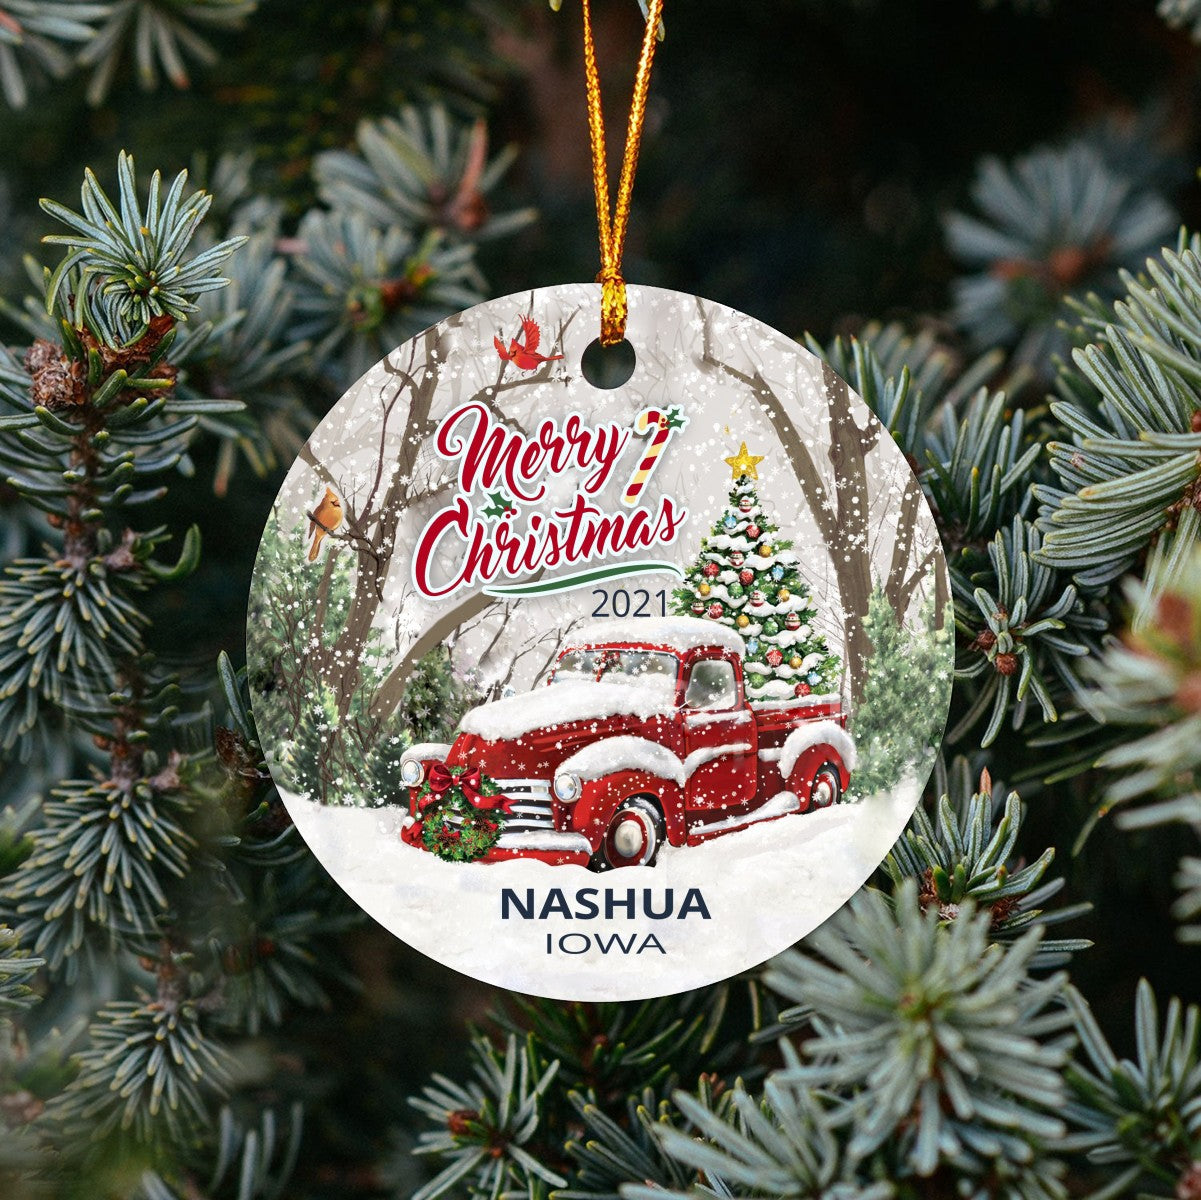 Christmas Tree Ornaments Nashua - Ornament With Name City, State Nashua Iowa IA Ornament - Red Truck Xmas Ornaments 3'' Plastic Gift For Family, Friend And Housewarming